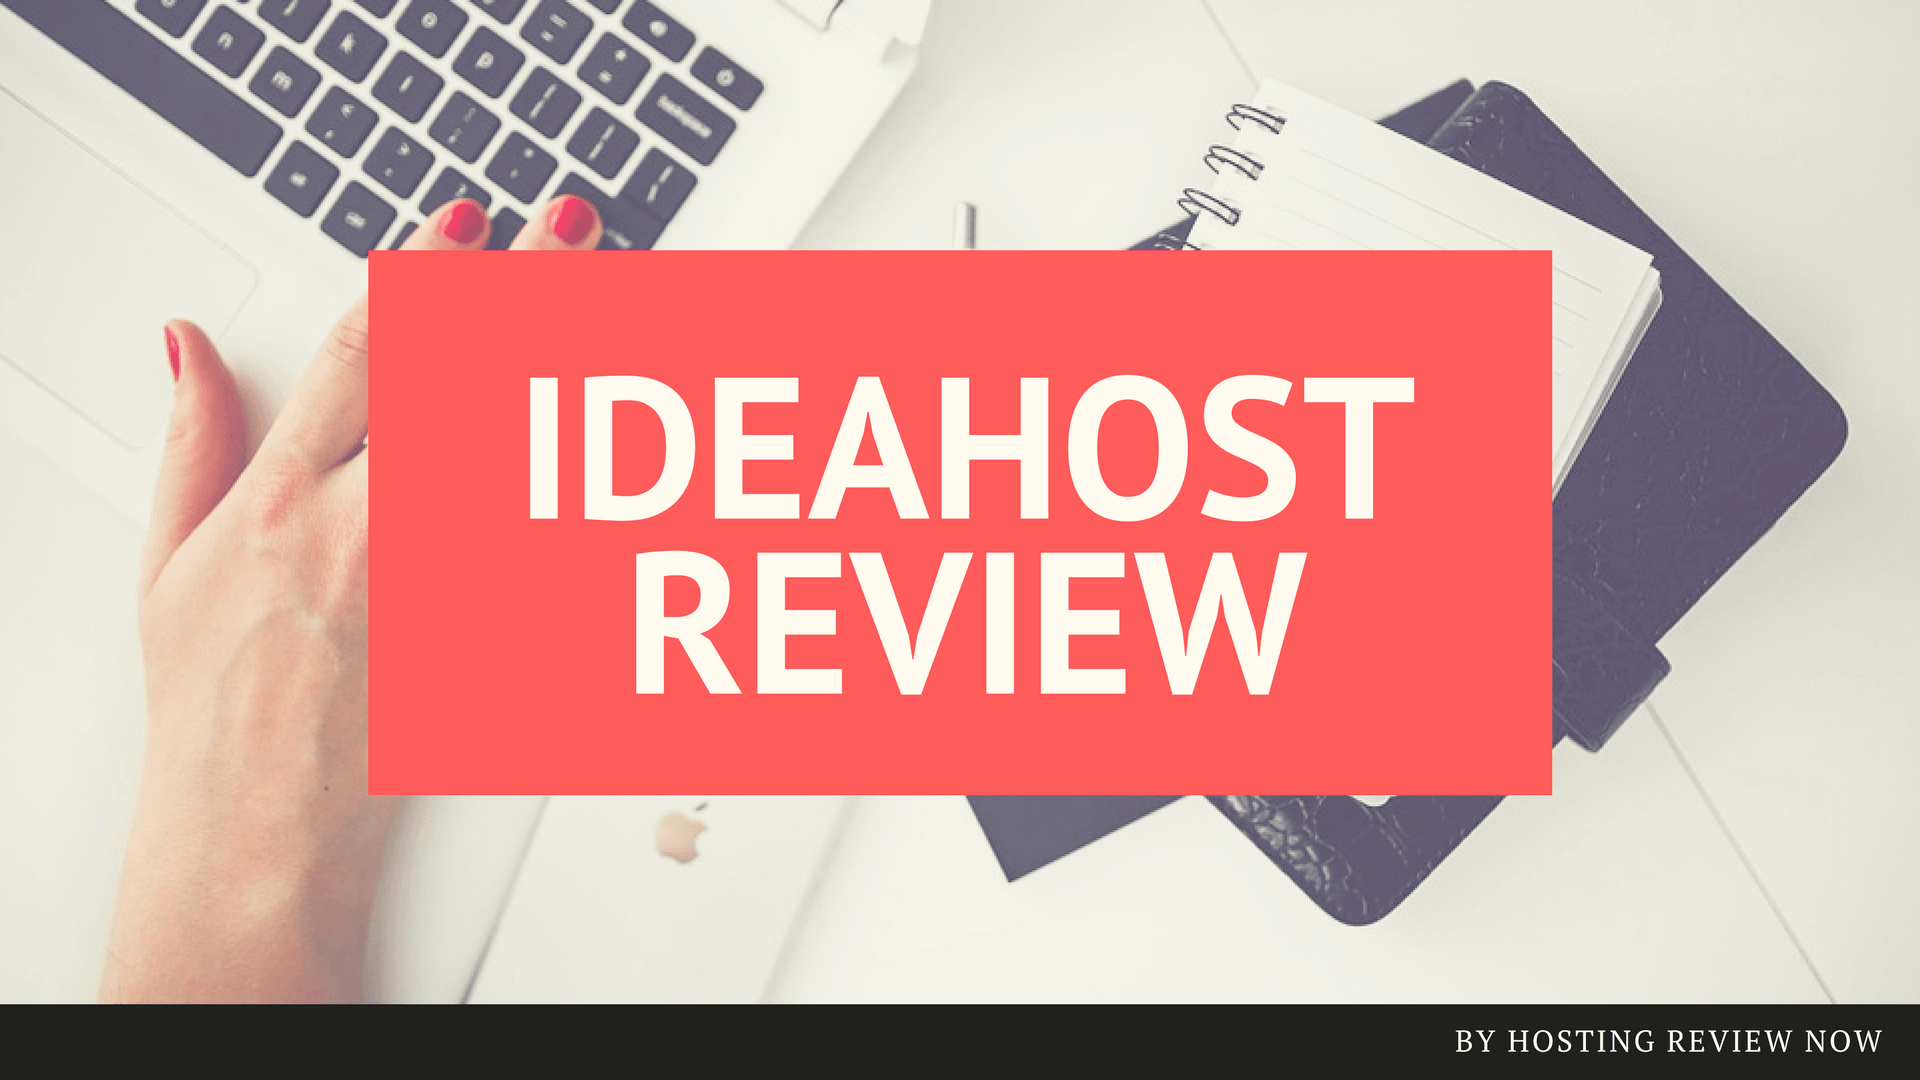 Ideahost Review